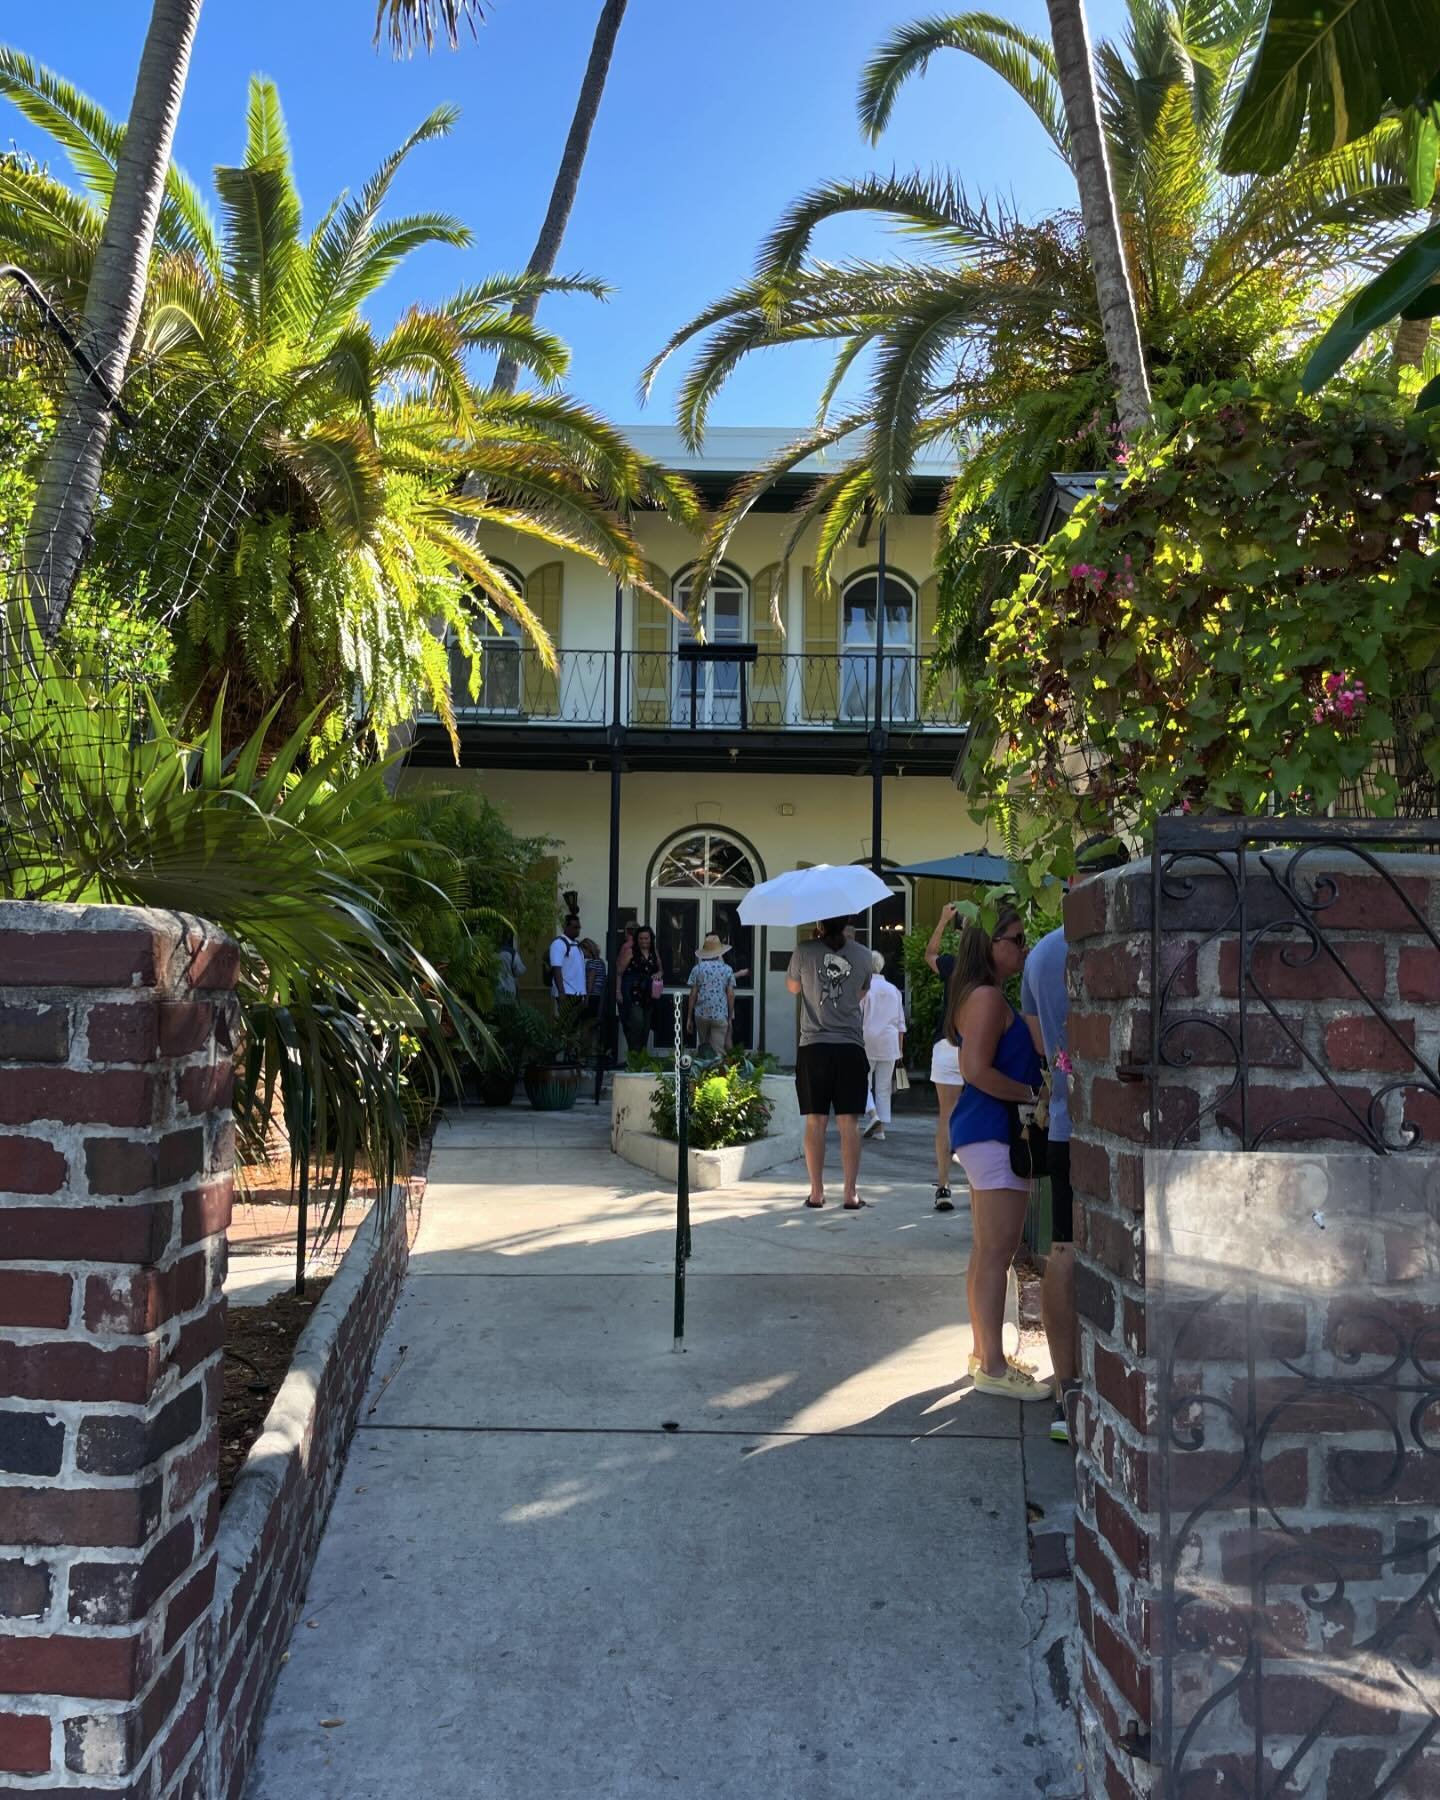 We didn&rsquo;t tour the Hemingway house again on our last trip to Key West, but I had to snap a picture of this icon as we walked by. If you haven&rsquo;t been, you should. 

#keywest #hemingway #hemingwayhouse #travelmore #slowliving #travelgram #f